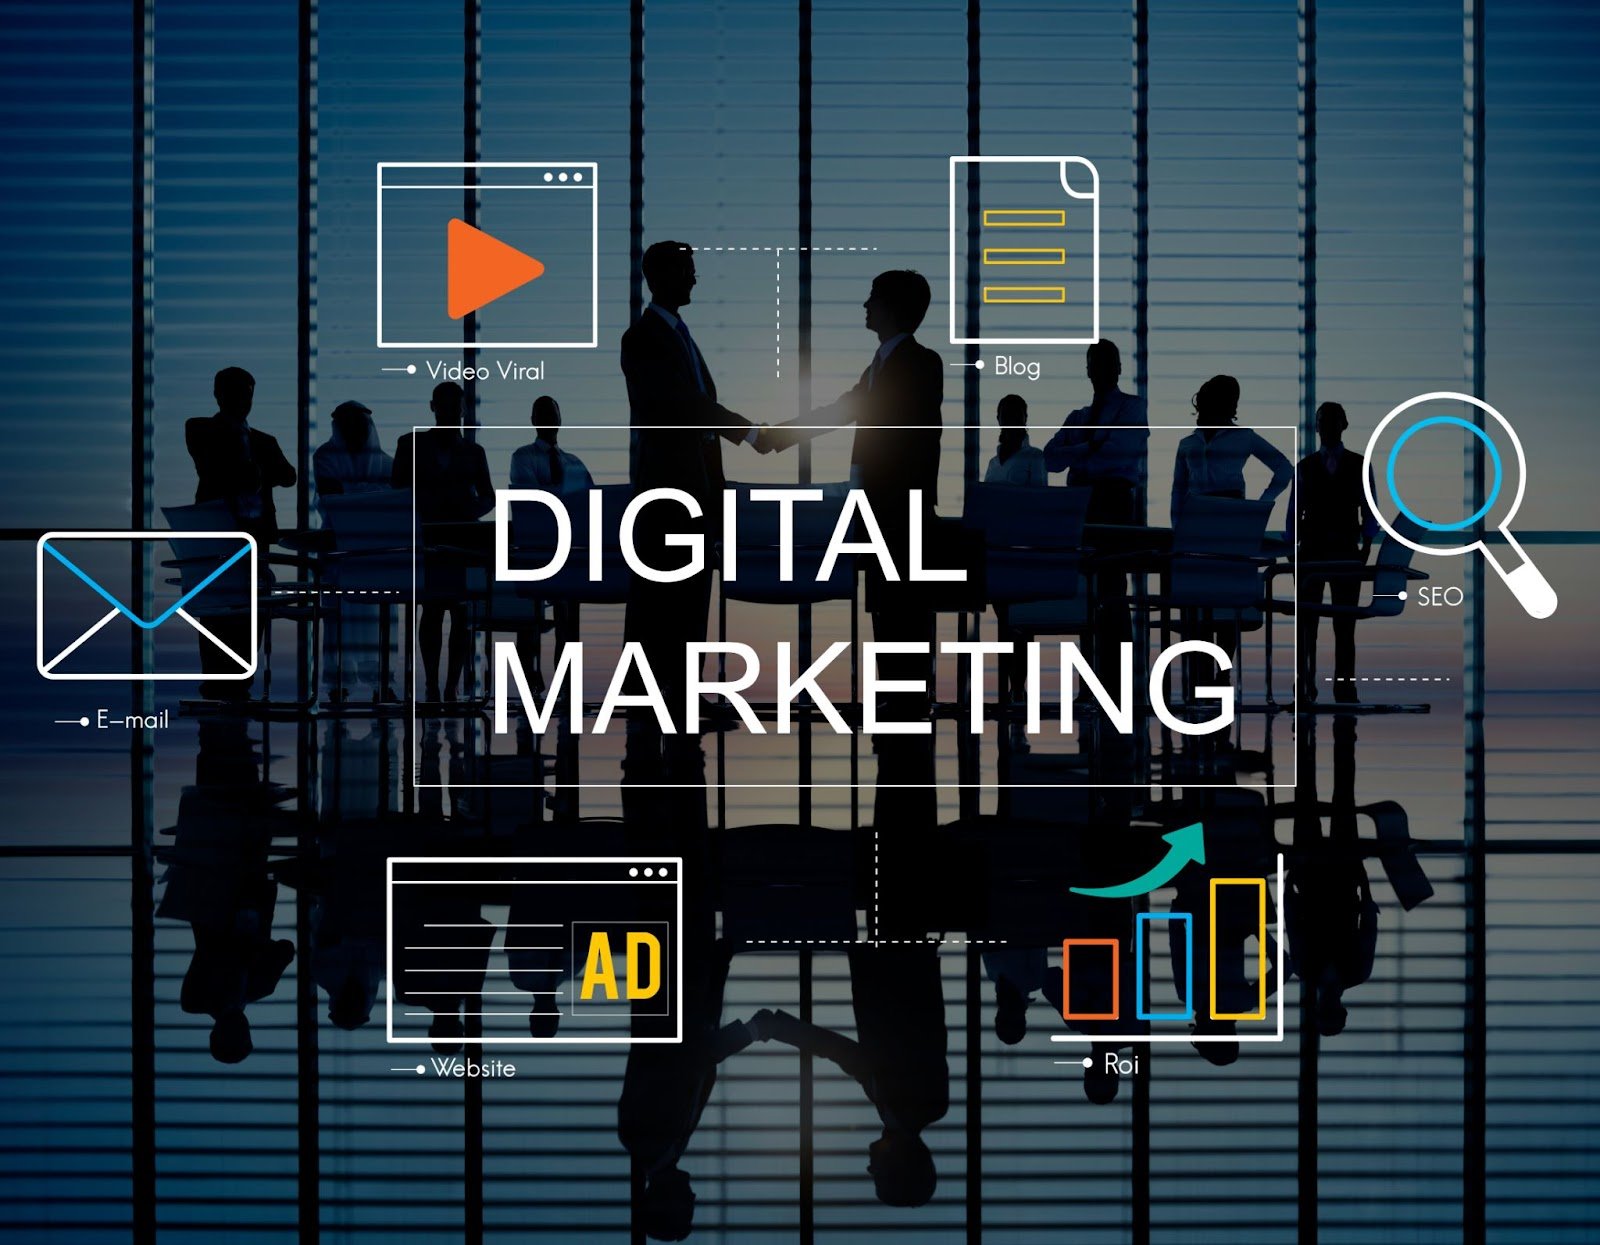 Types of Digital Marketing Campaigns